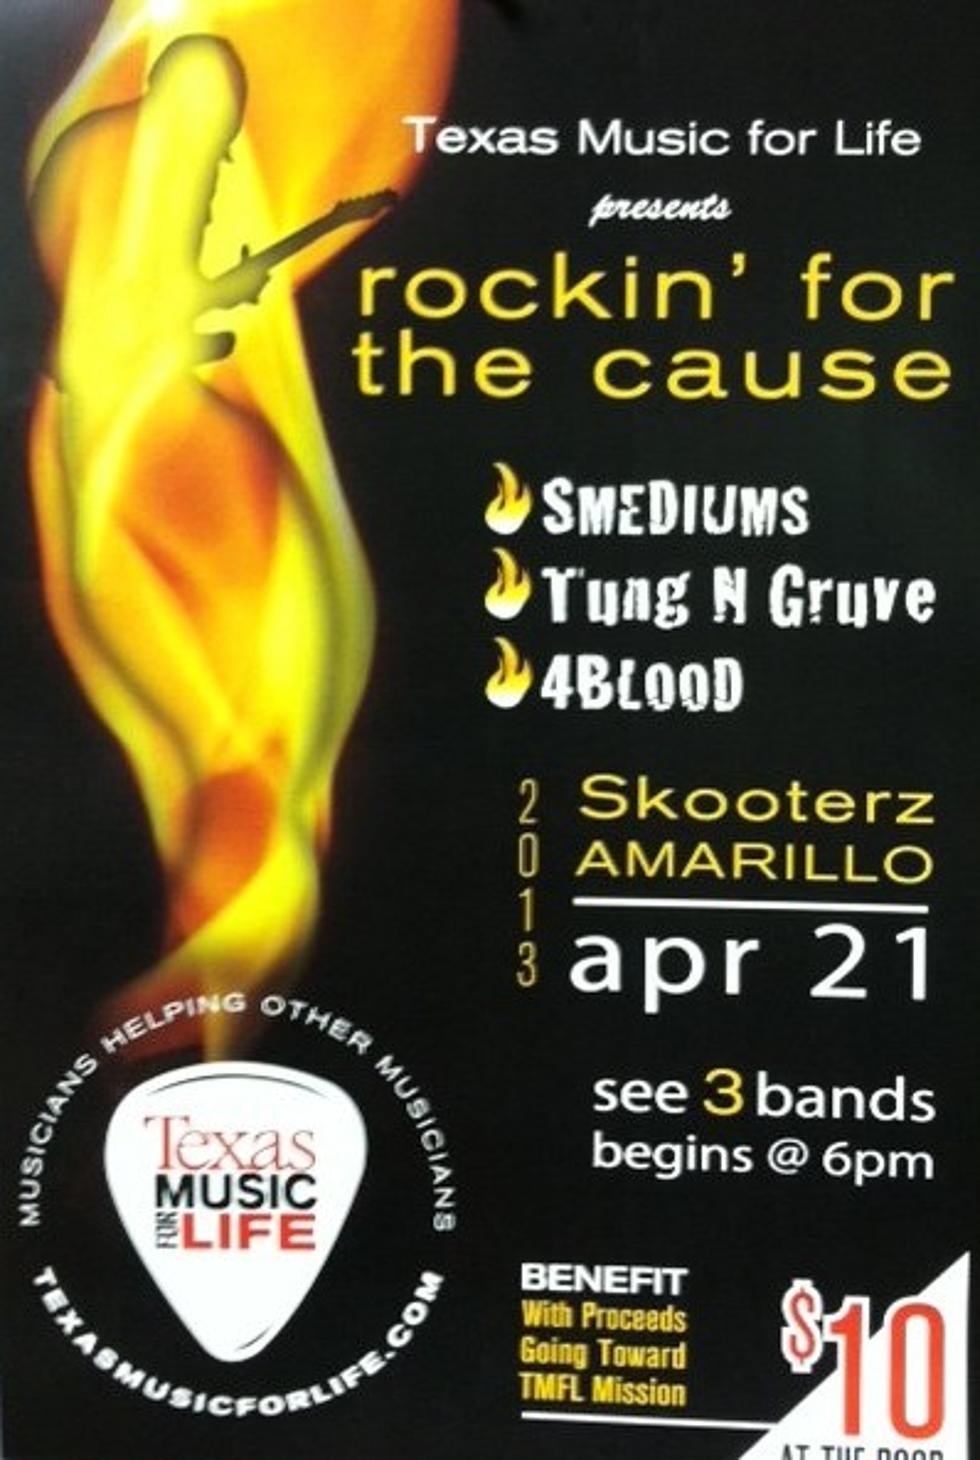 Texas Music For Life Present “Rockin for the Cause”